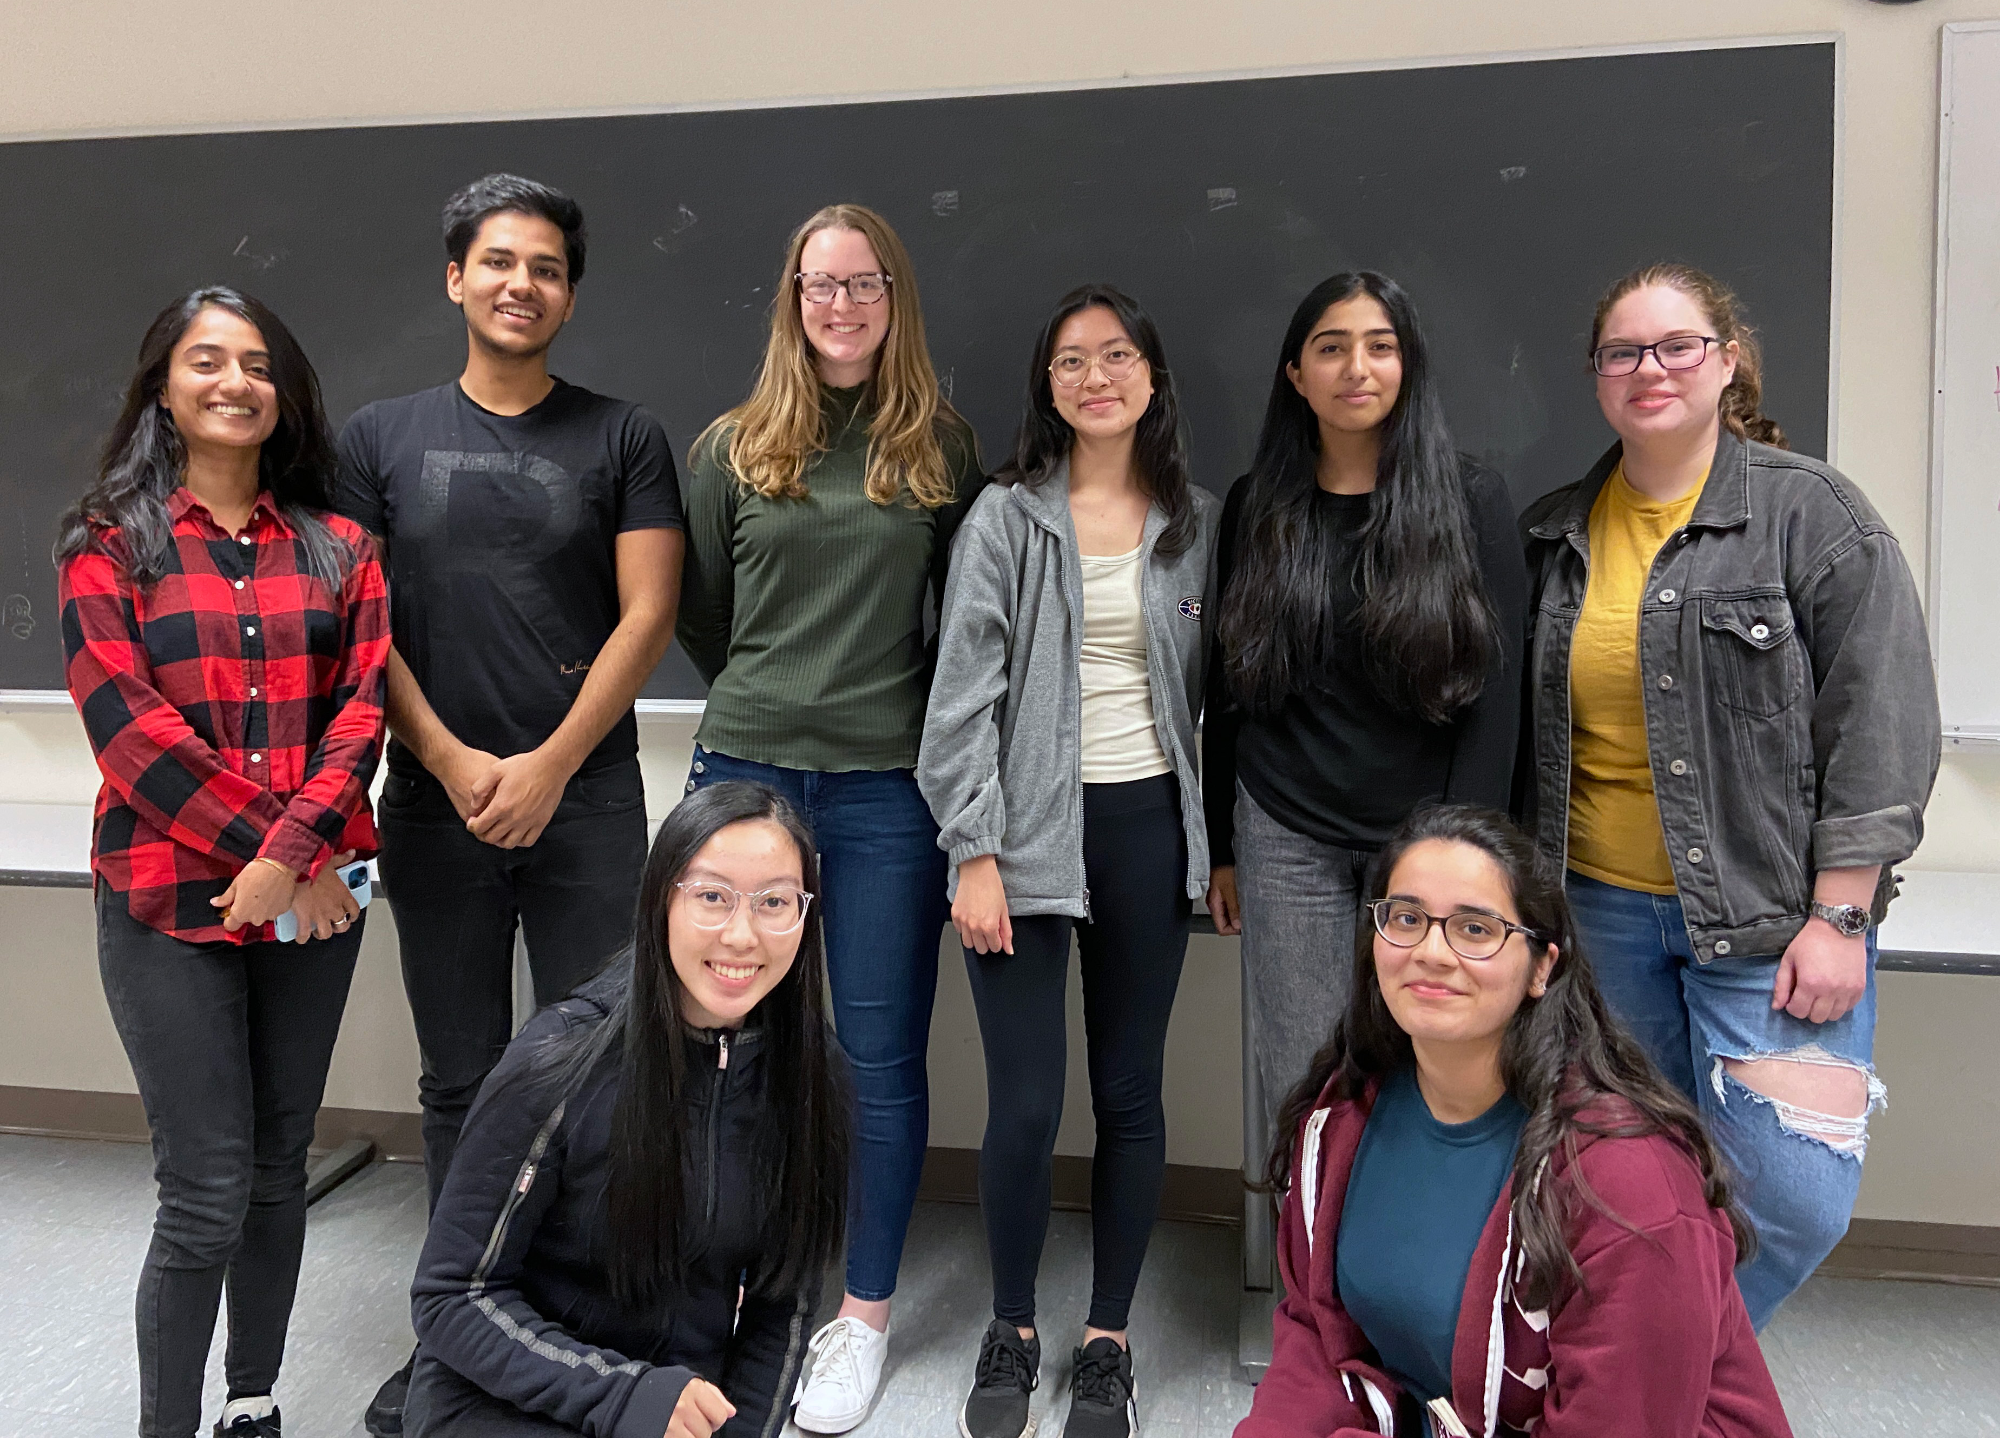 The Sci-Space Crew. Back row, left to right: Mansehaj Sandhu, Sparsh Sharma, Carys Kenny-Howell, Ivy Huang, Preet Thandi, Nicole Lowenstein. Front row left to right: Tiffany Deng, Fatima Yaseen